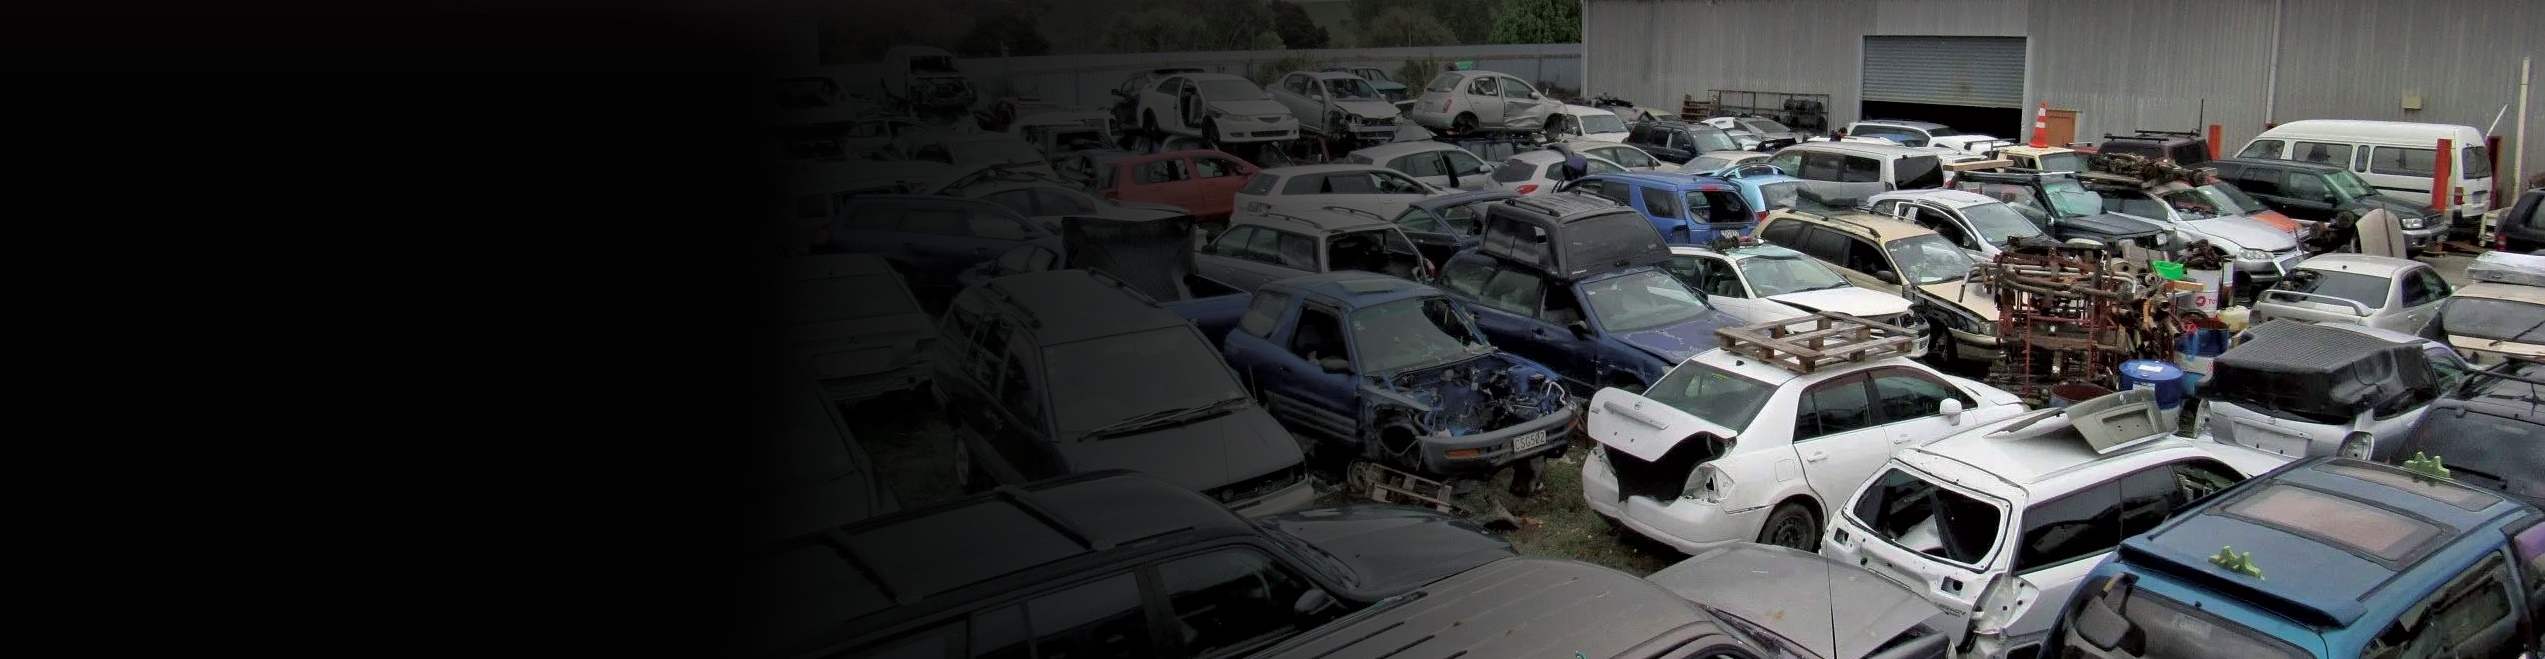 Over 400 cars in the wreckers yard and even more spare parts in stock